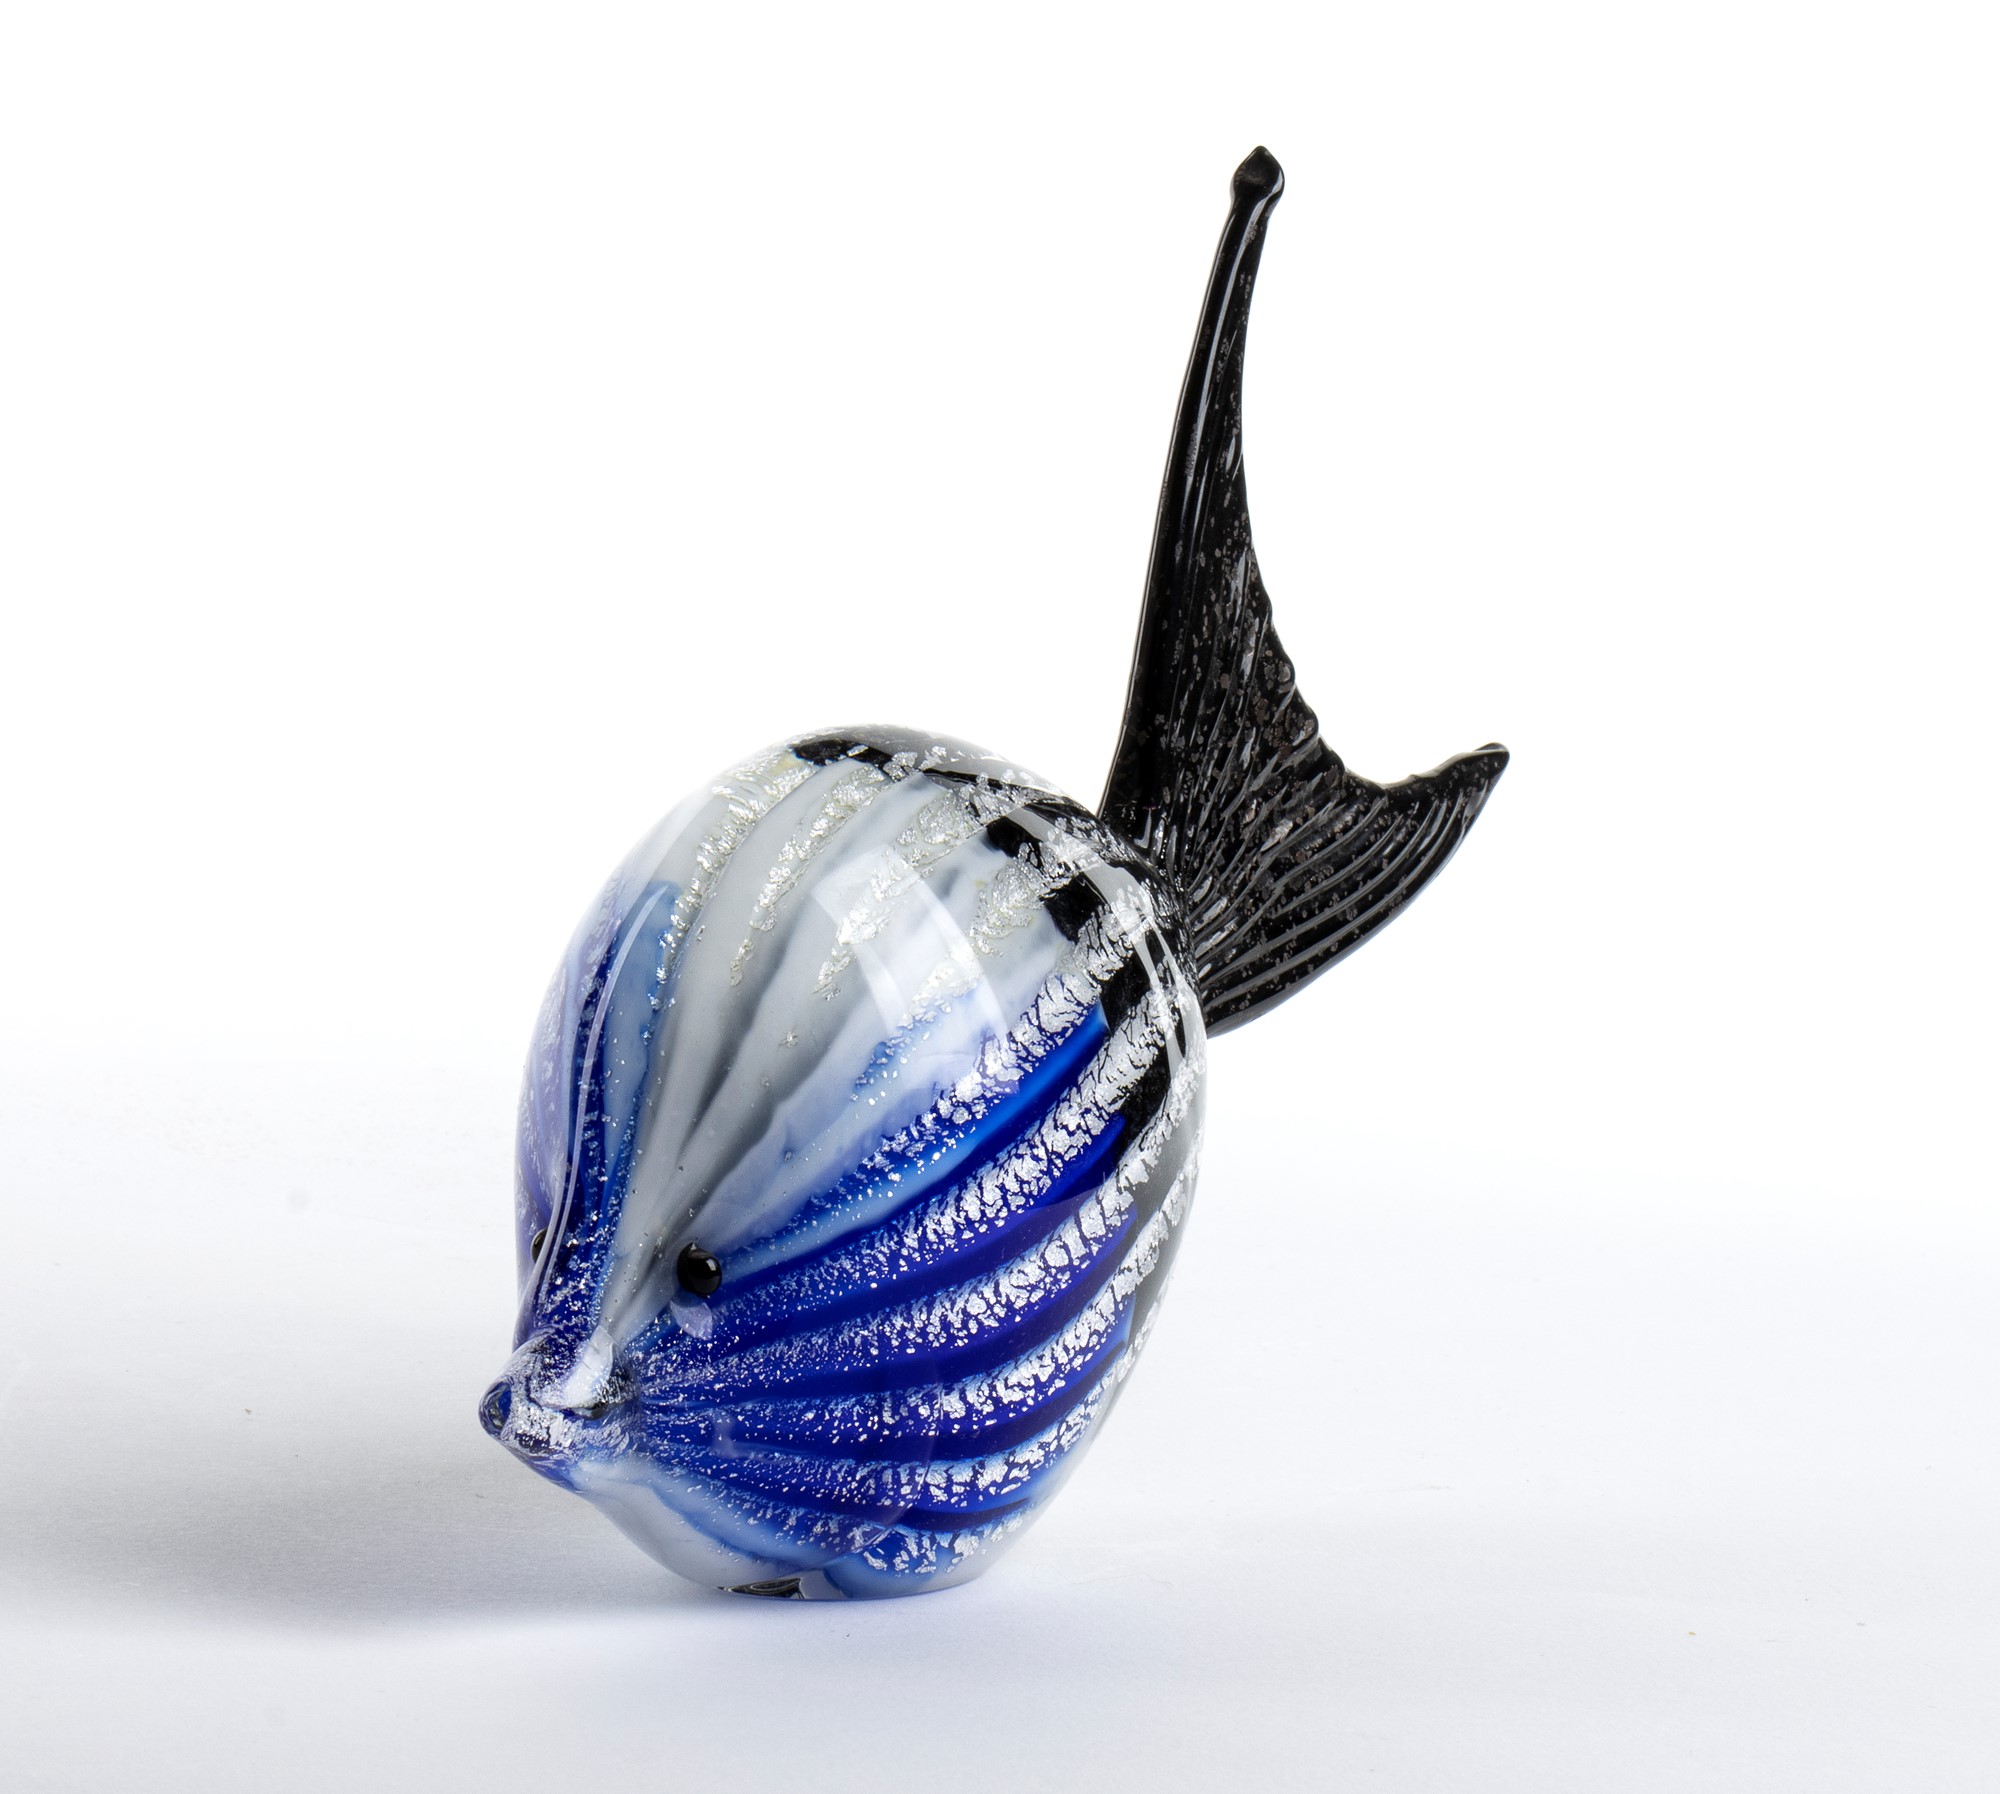 Small fish-shaped sculpture in Murano glass - Image 5 of 11